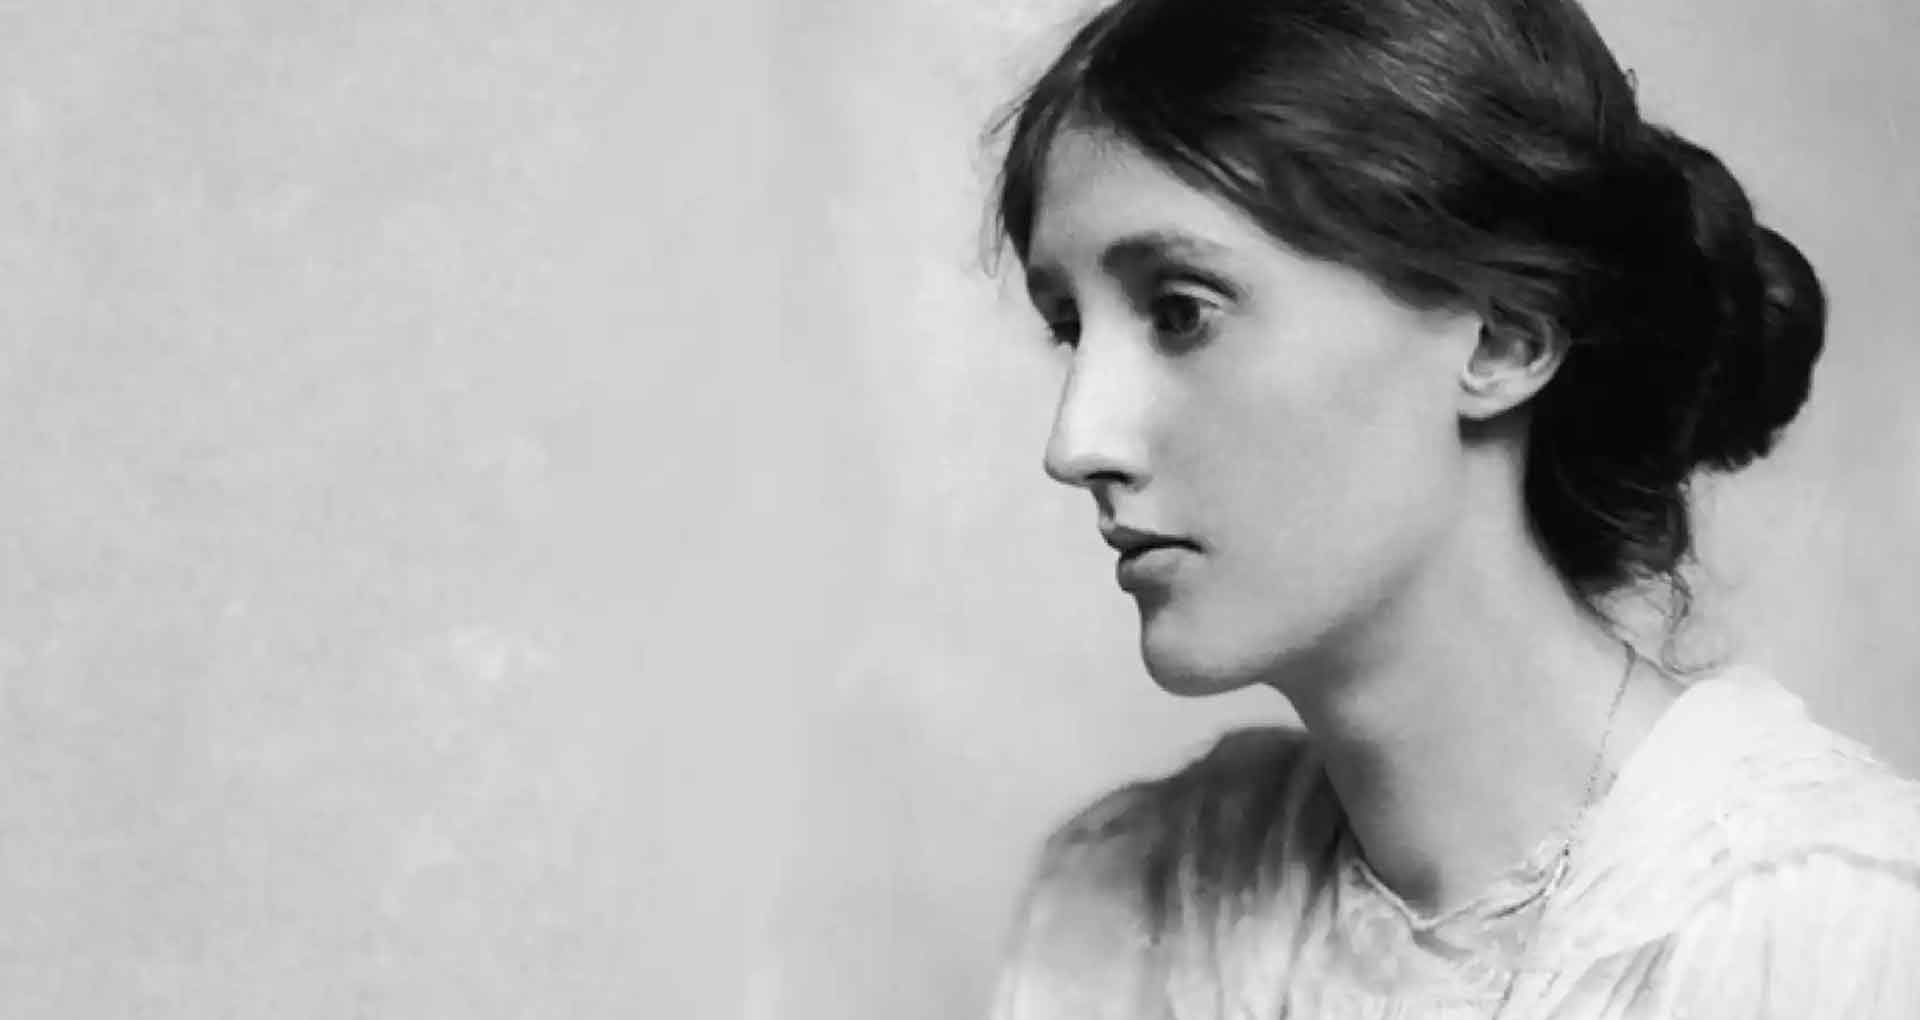 The life and work of Virginia Woolf, a tormented writer